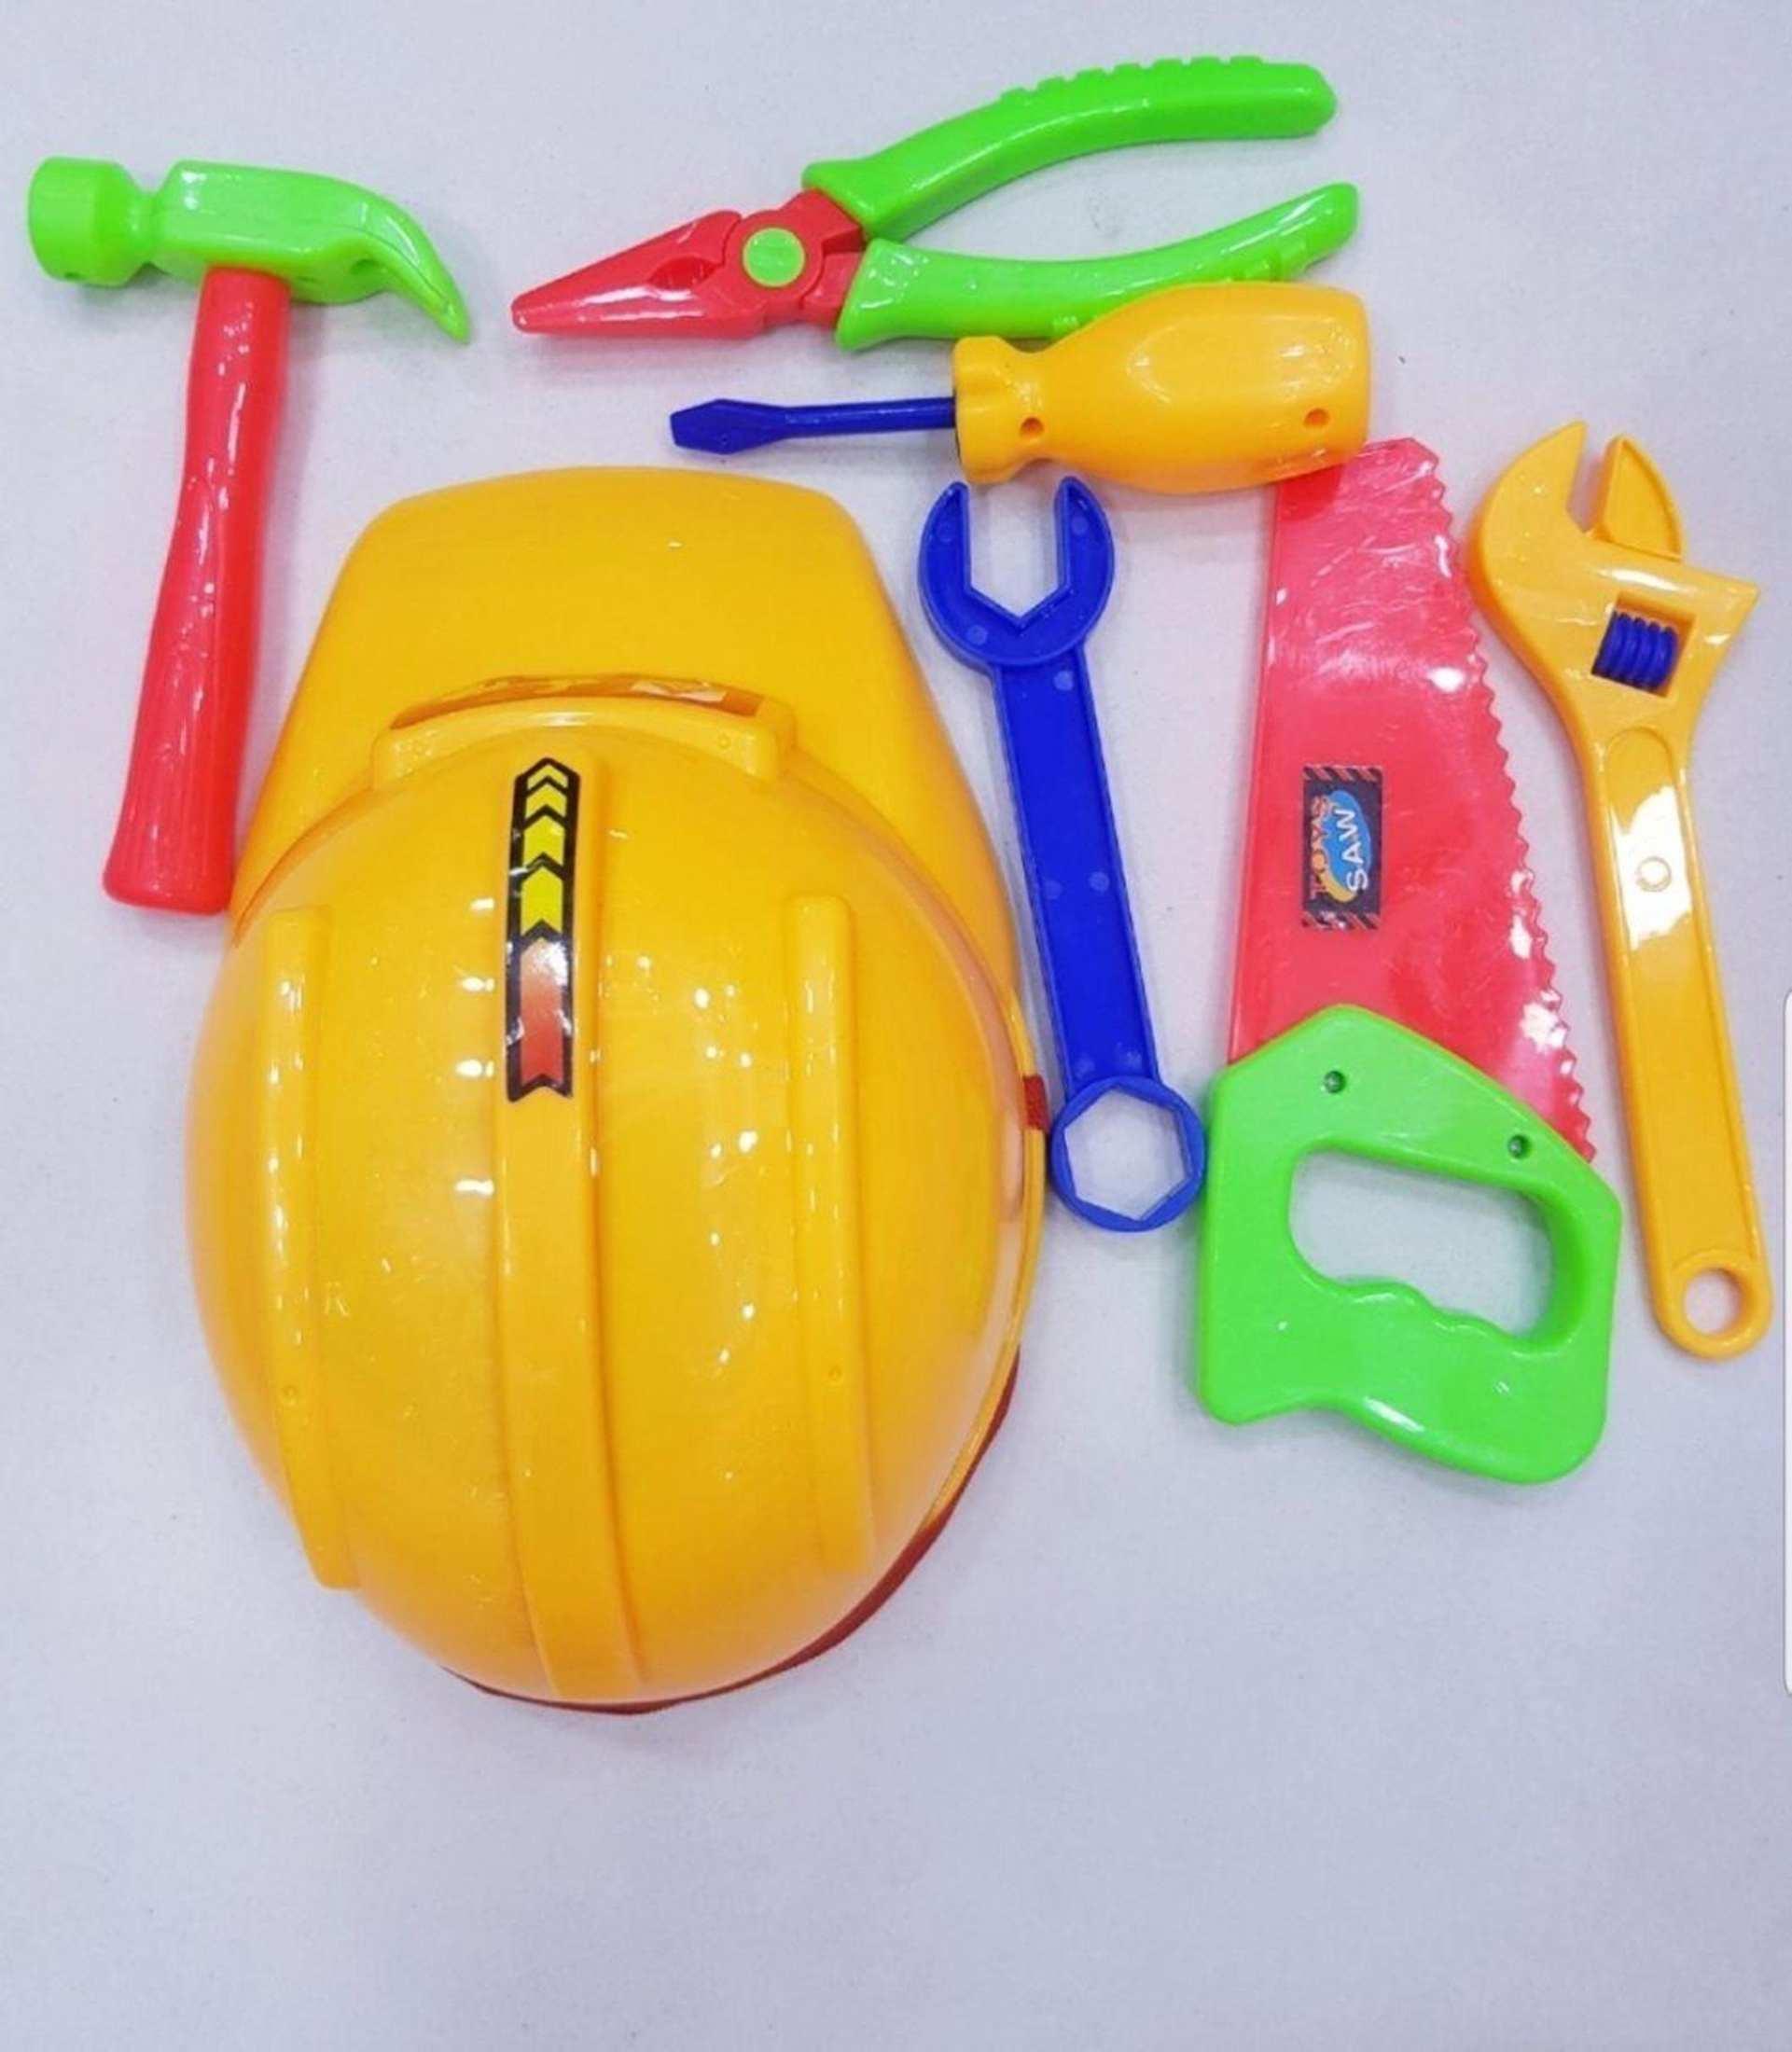 2023 Construction Helmet With Mechanic Tools Toy Set - Baby Toys